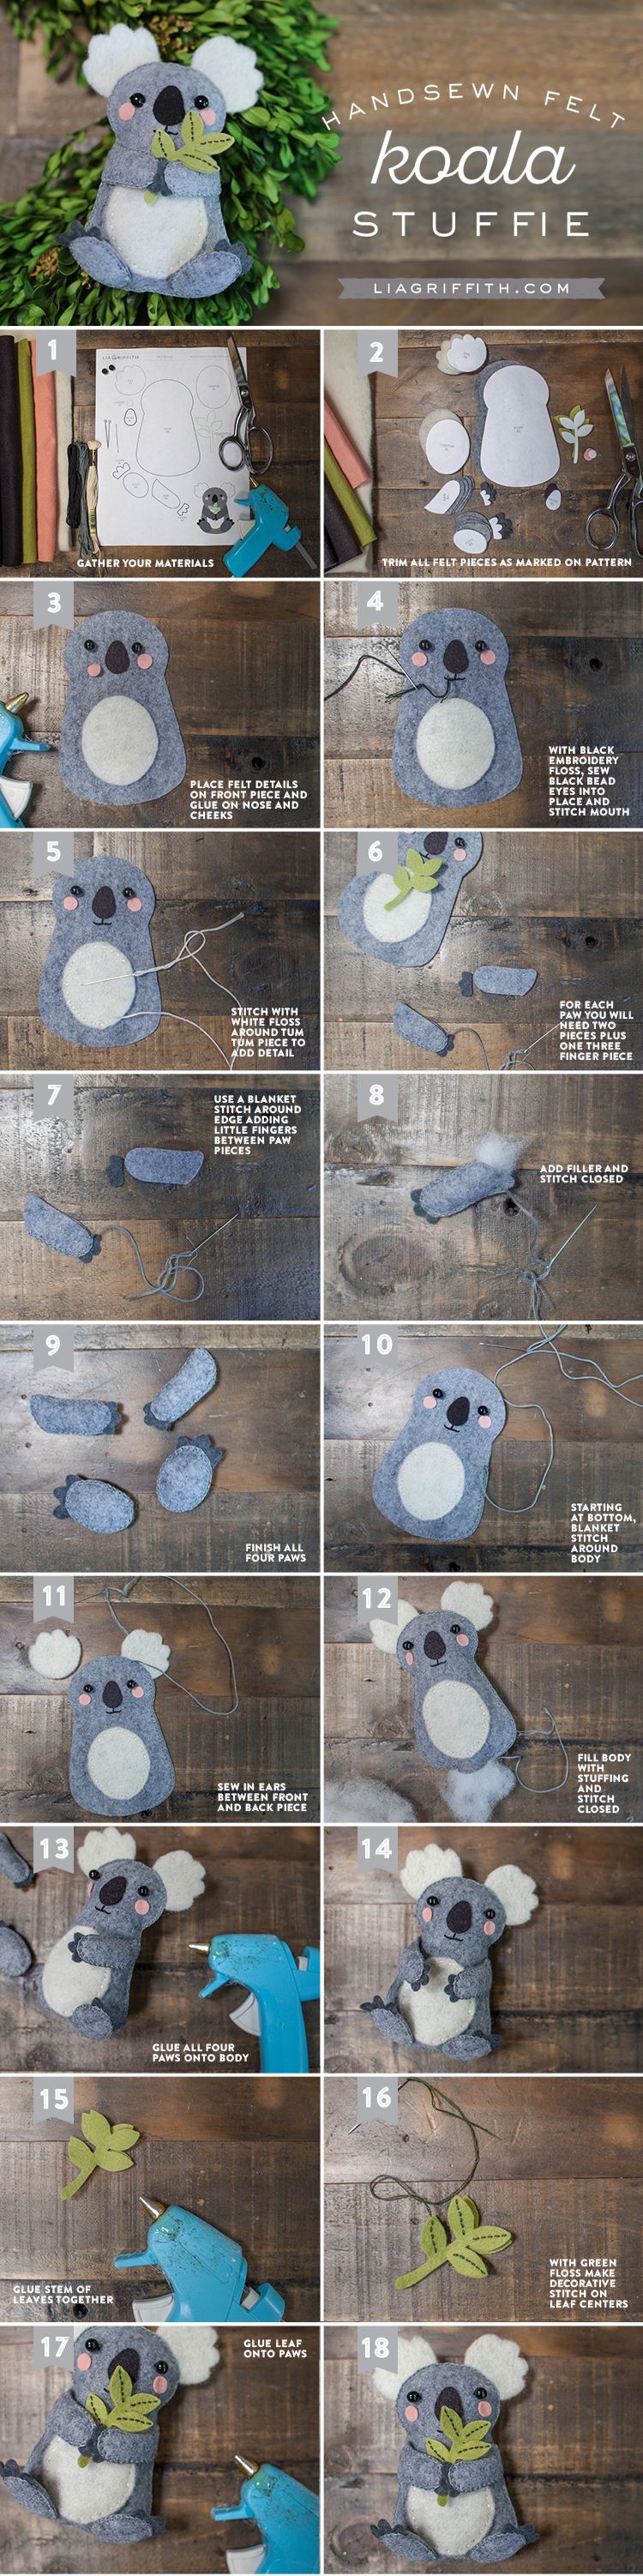 Koala Stuffie Tutorial from Michaels Makers Lia Griffith